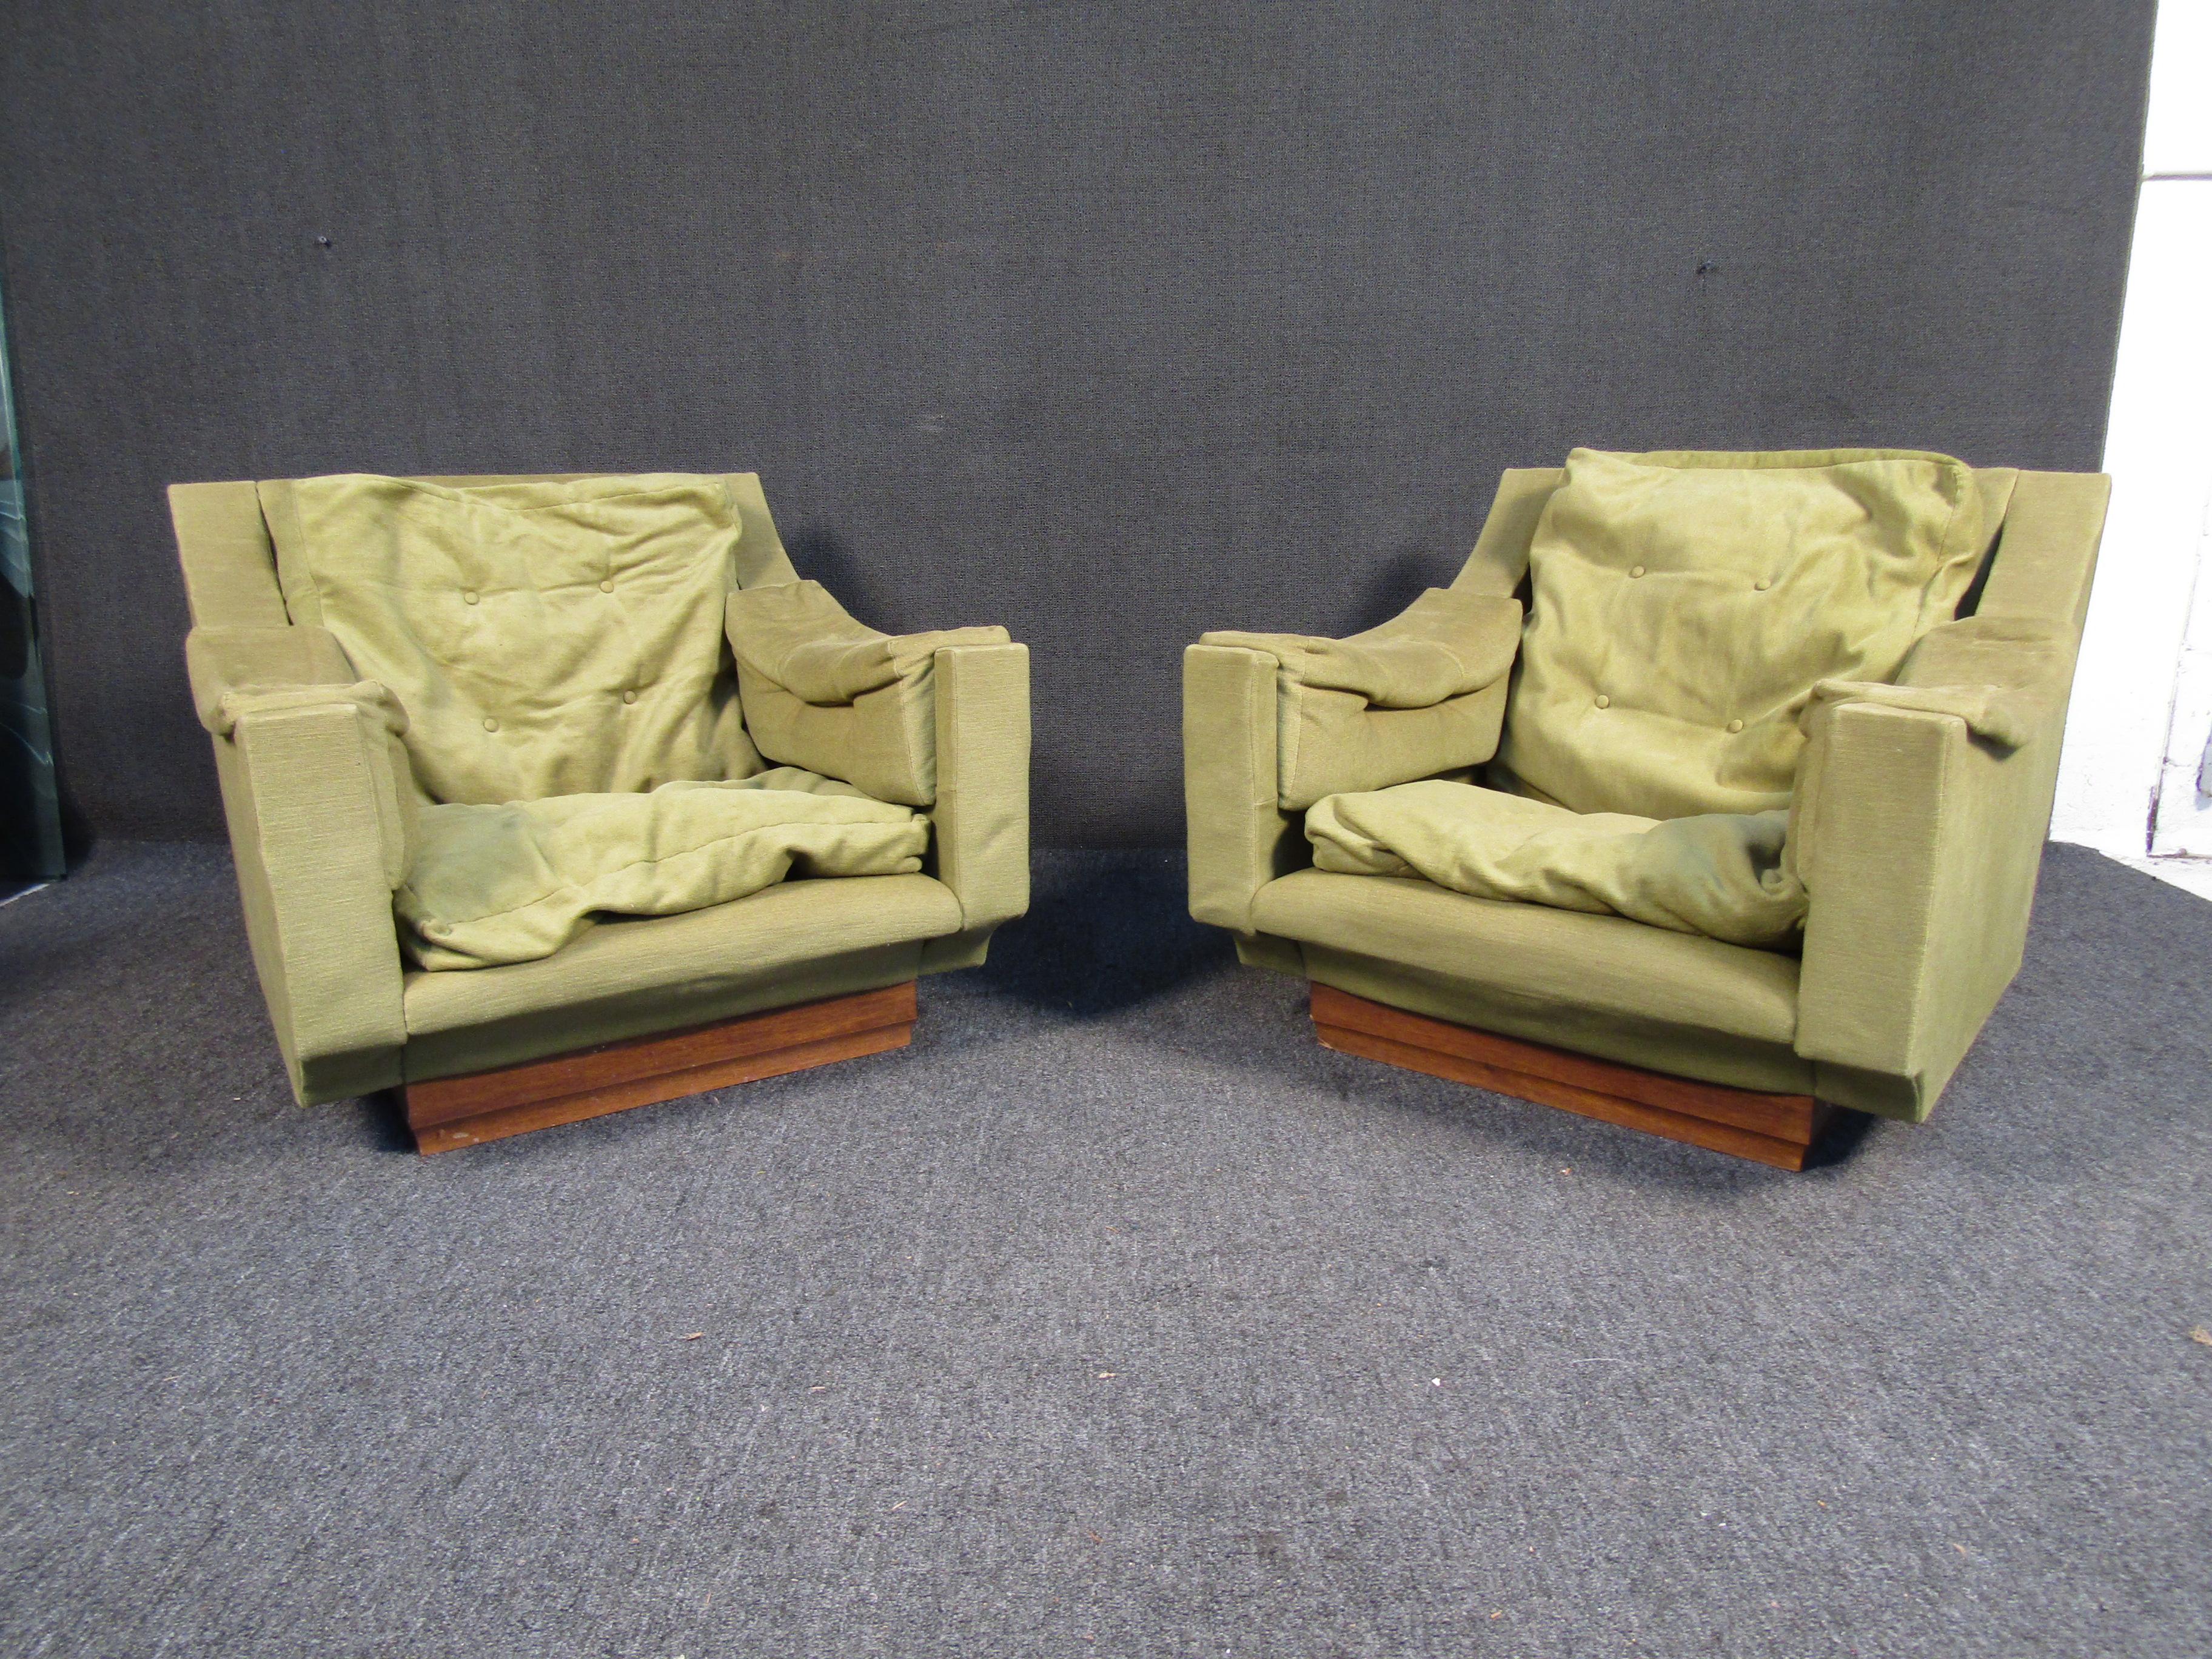 These vintage mid-century green lounge chairs feature sloped armrests, plush green upholstery and a wooden accented base. If you are looking for chairs to add vintage flare to your living space these would be a perfect addition. 

Please confirm